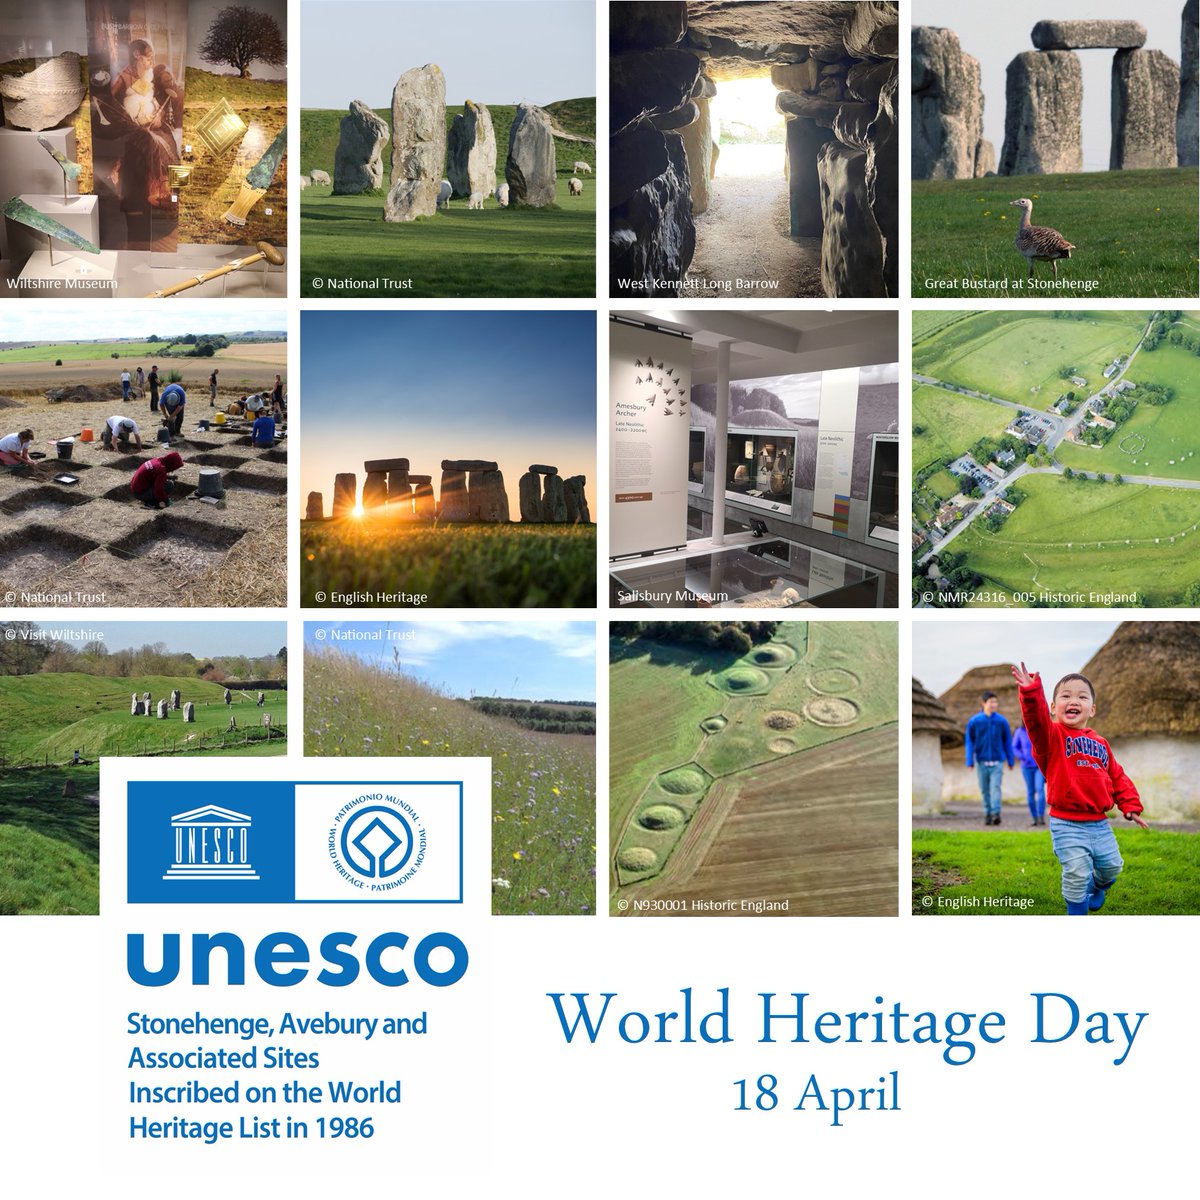 Today for #WorldHeritageDay we’re joining nations across the world in celebrating our unique sites. We’re one of many partners caring for the monuments, landscapes, communities and more within the @StoneAveWHS bit.ly/StonehengeandA… @UNESCOUK @WorldHeritageUK